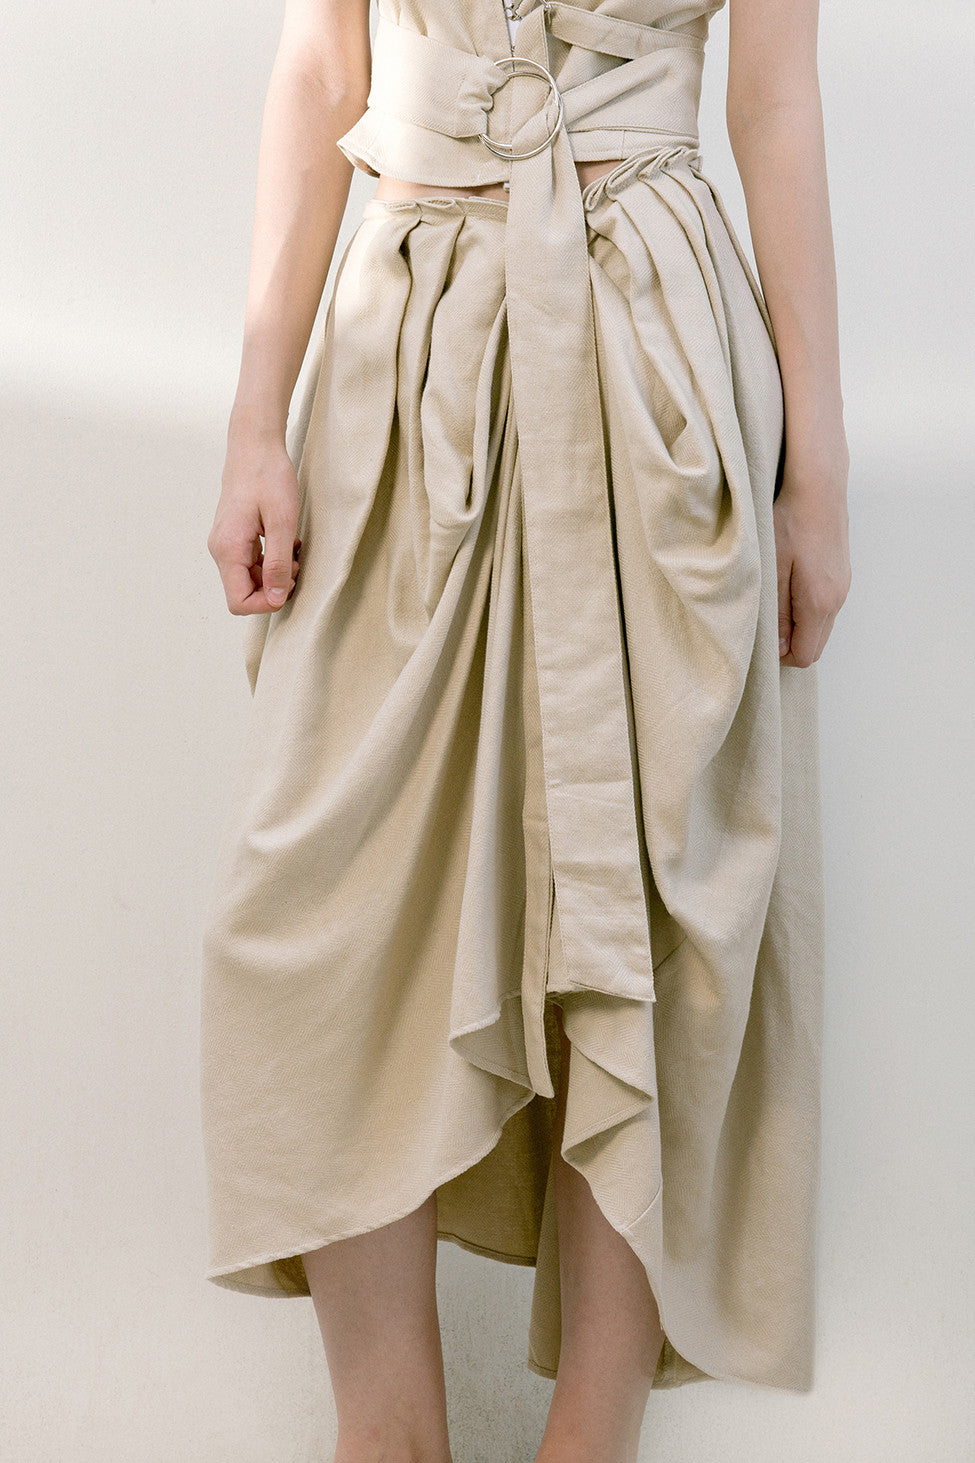 The Keria skirt in draped front skirt with detachable sash belt. Concealed back zip closure. Mid length. 